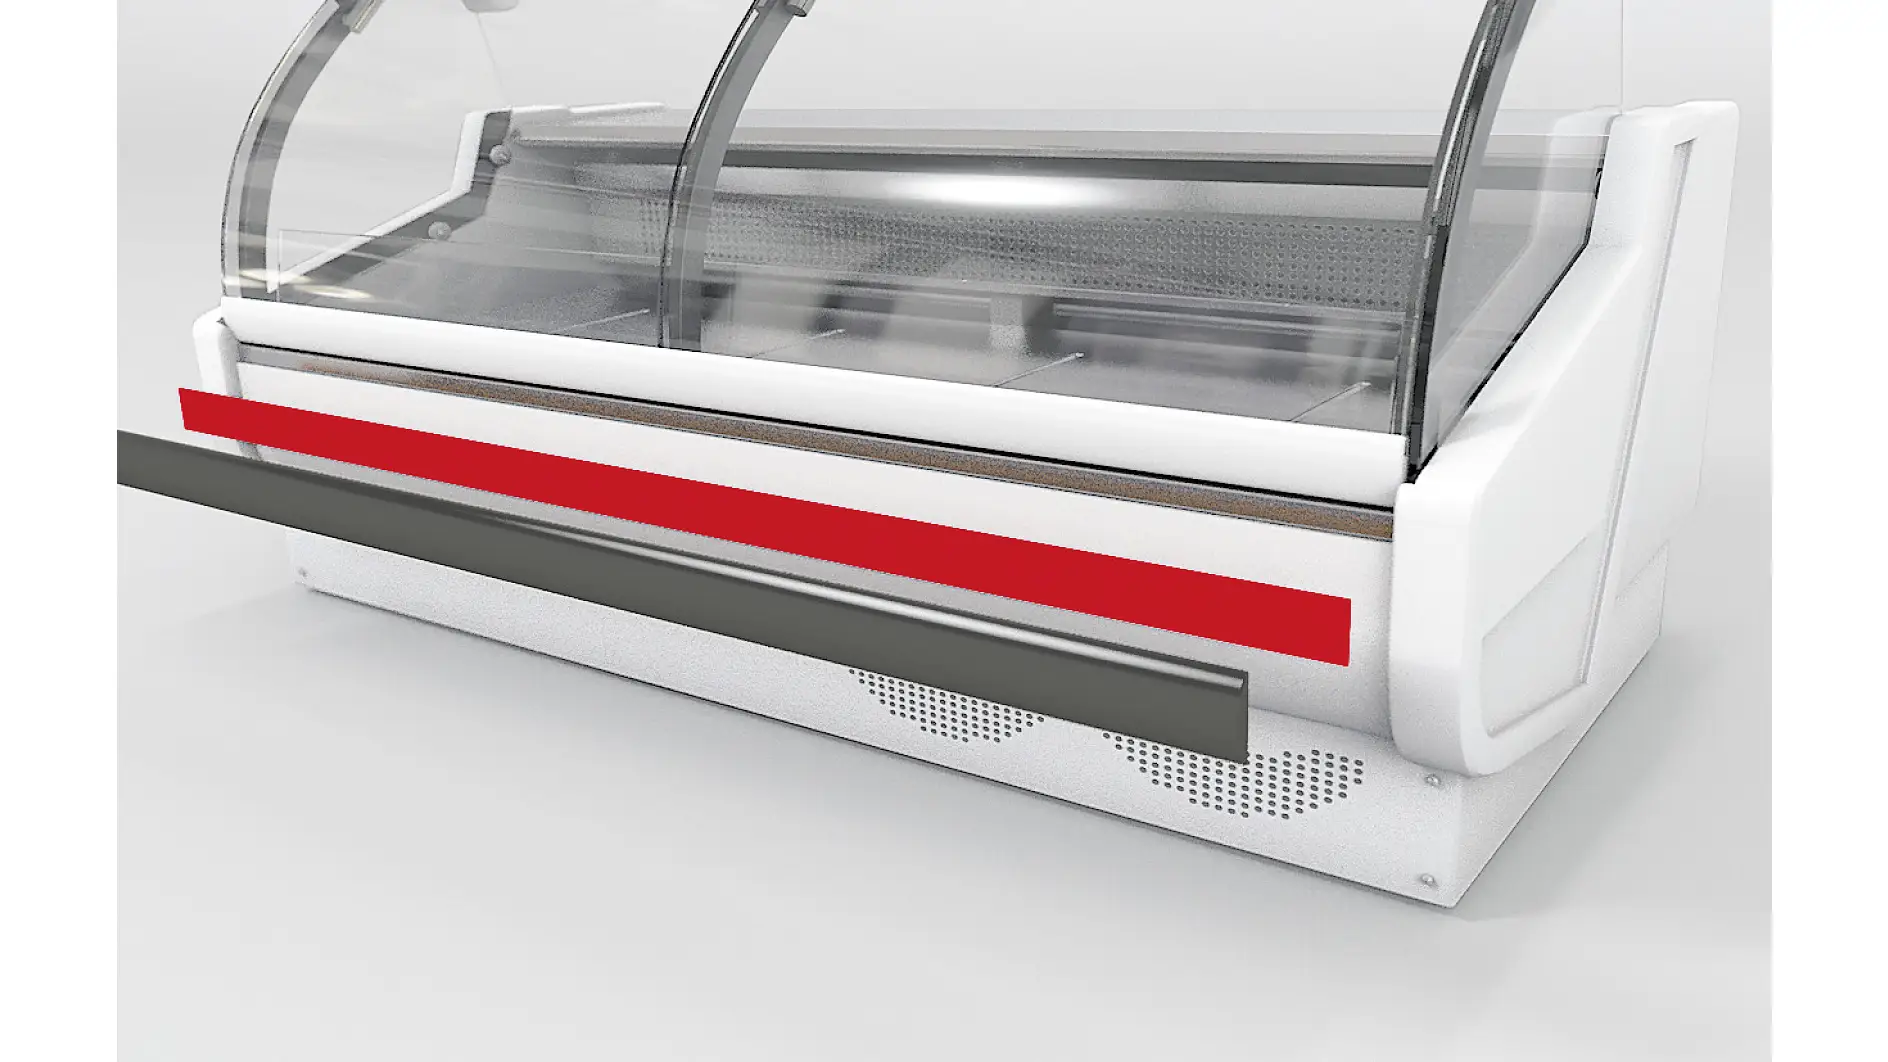 Bumper rails are mounted on the metal housing of an appliance by using adhesive tape.